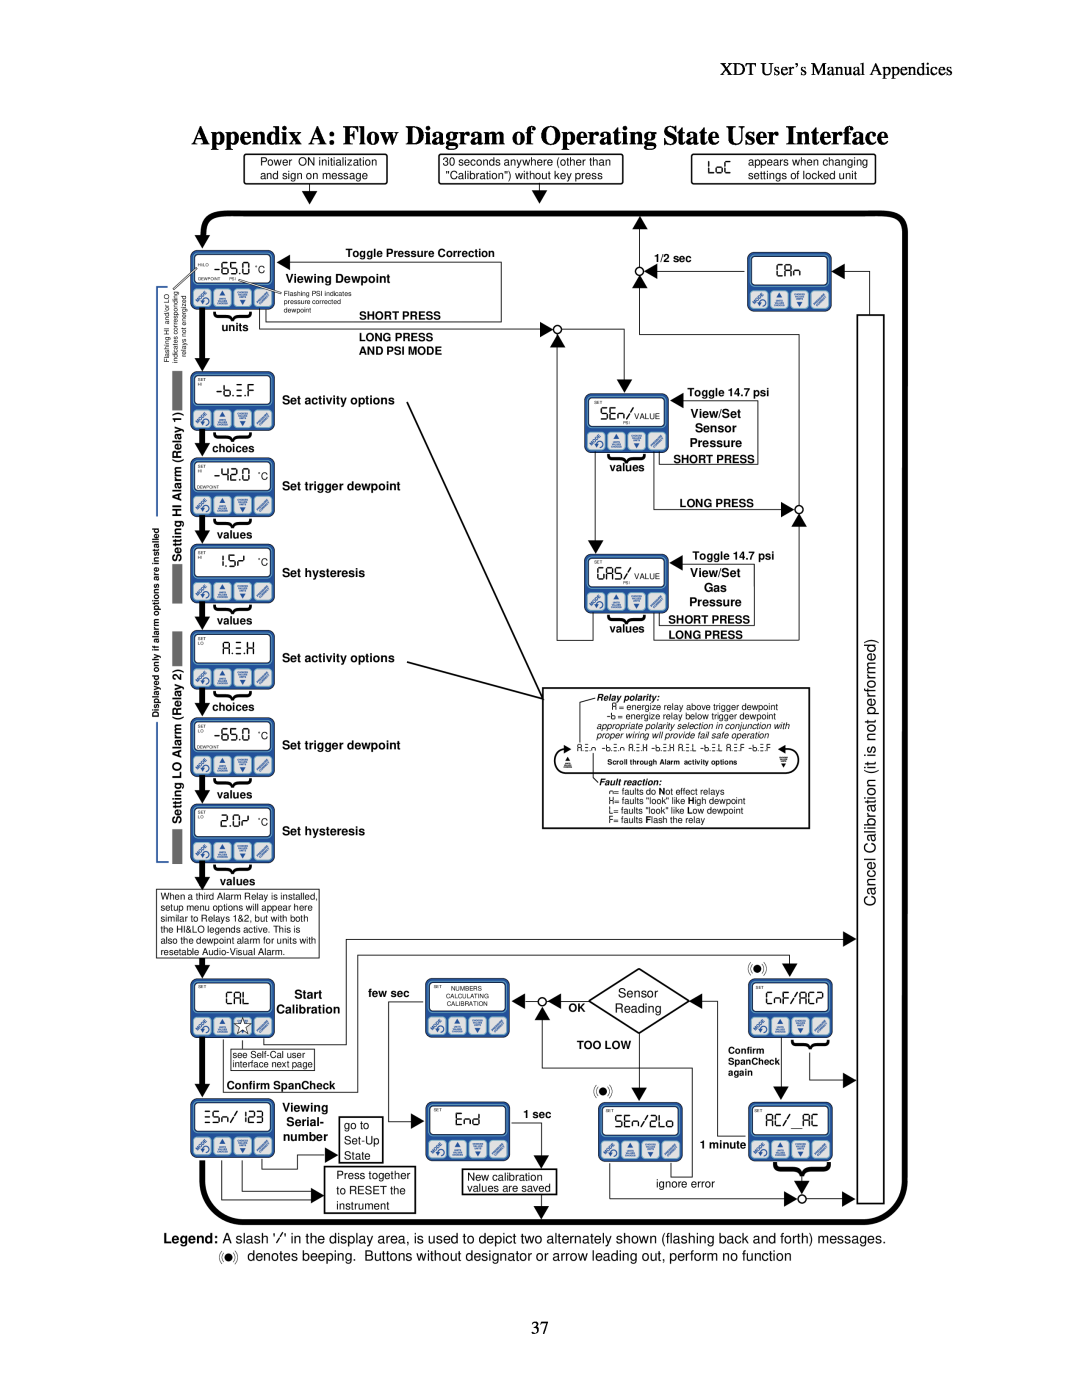 Epson manual Appendix A Flow Diagram of Operating State User Interface, XDT User’s Manual Appendices 